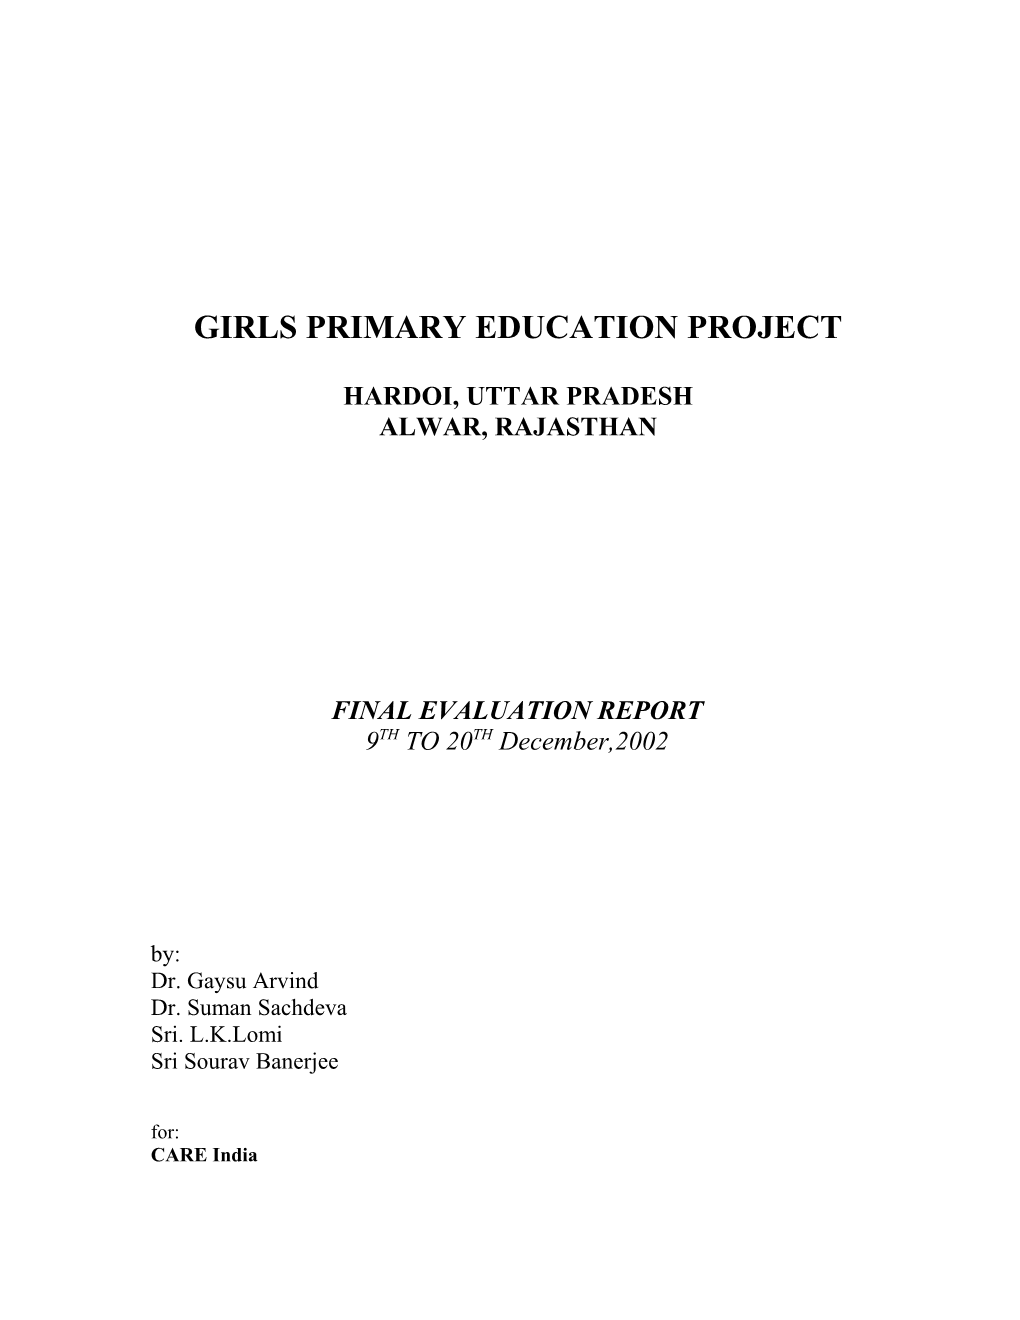 Girls' Primary Education Project